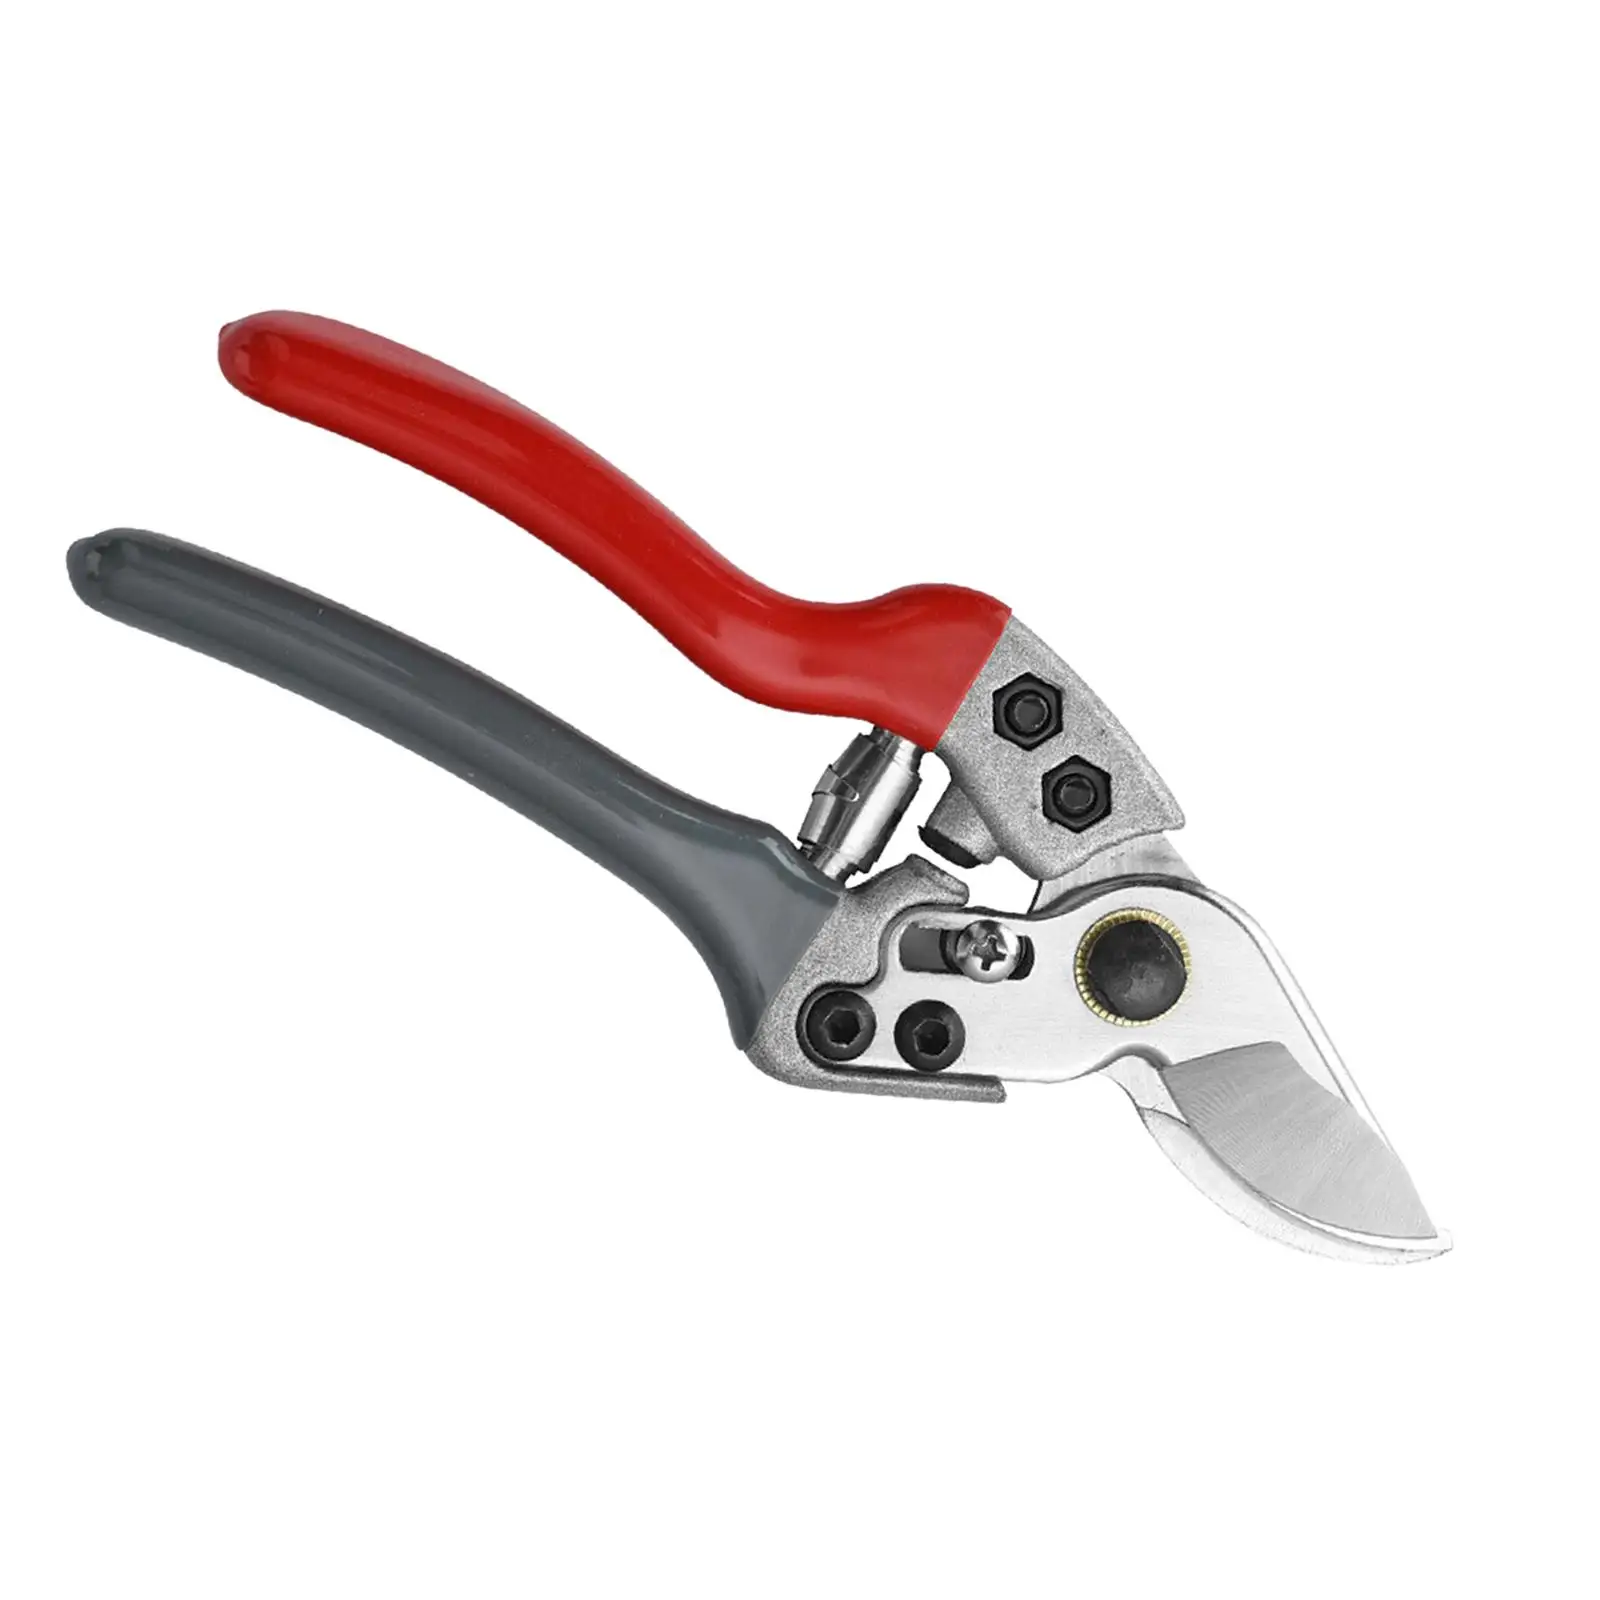 Pruning shear Gardening Tools Branch Cutter Trimming Hand Pruners Garden Clippers for Orchard Bonsai Bushes Branches